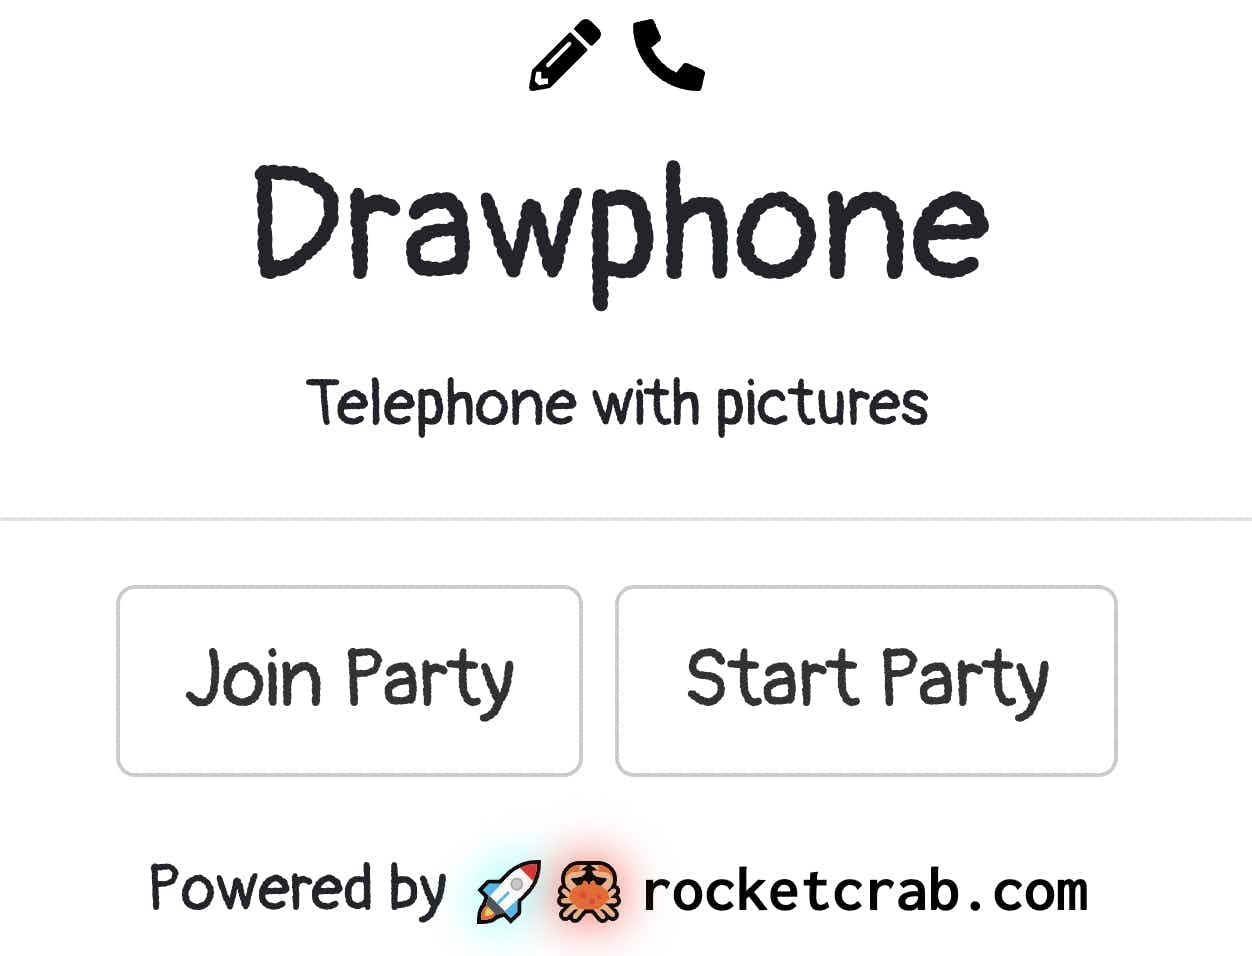 A screenshot of the Drawphone game on https://drawphone.tannerkrewson.com 